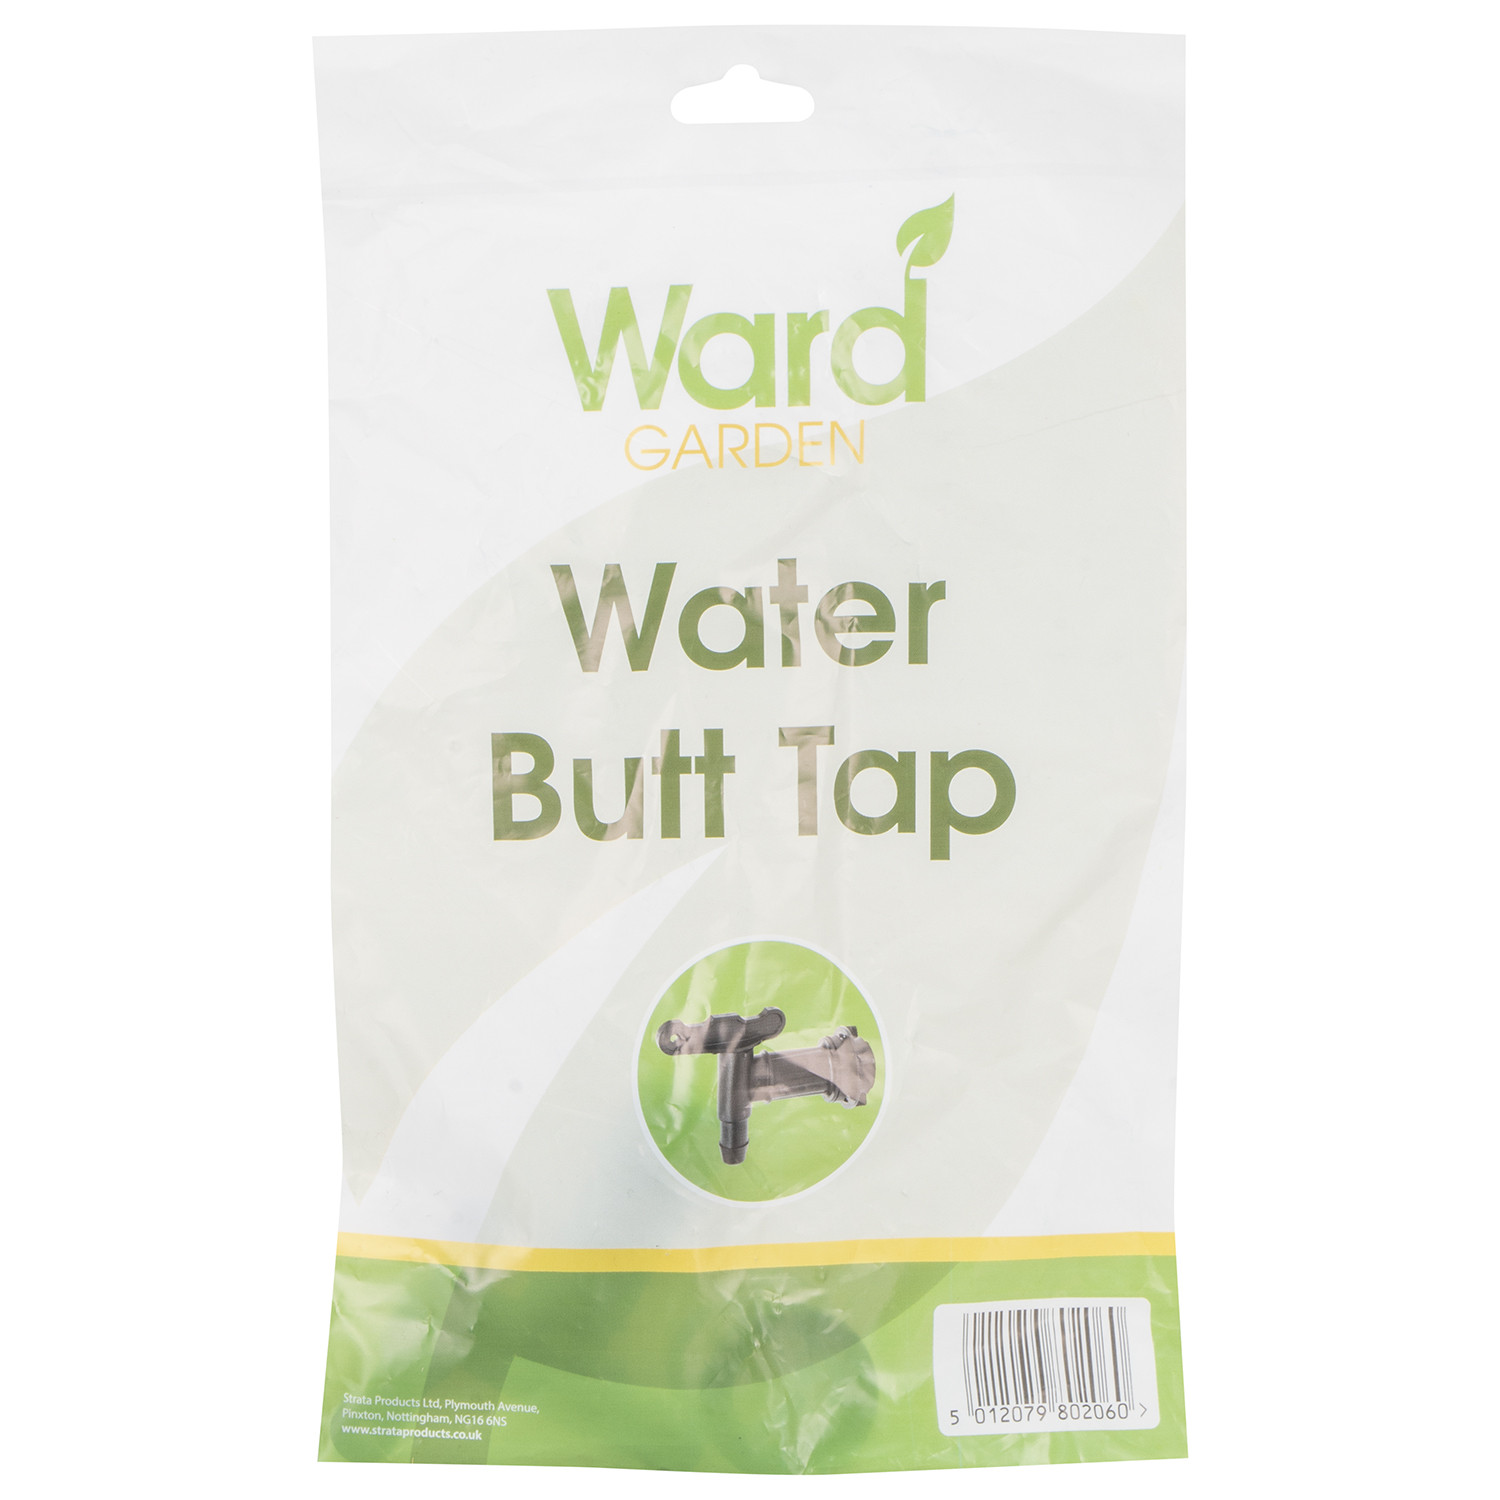 Ward Quality Gardenware Water Butt Tap Image 2